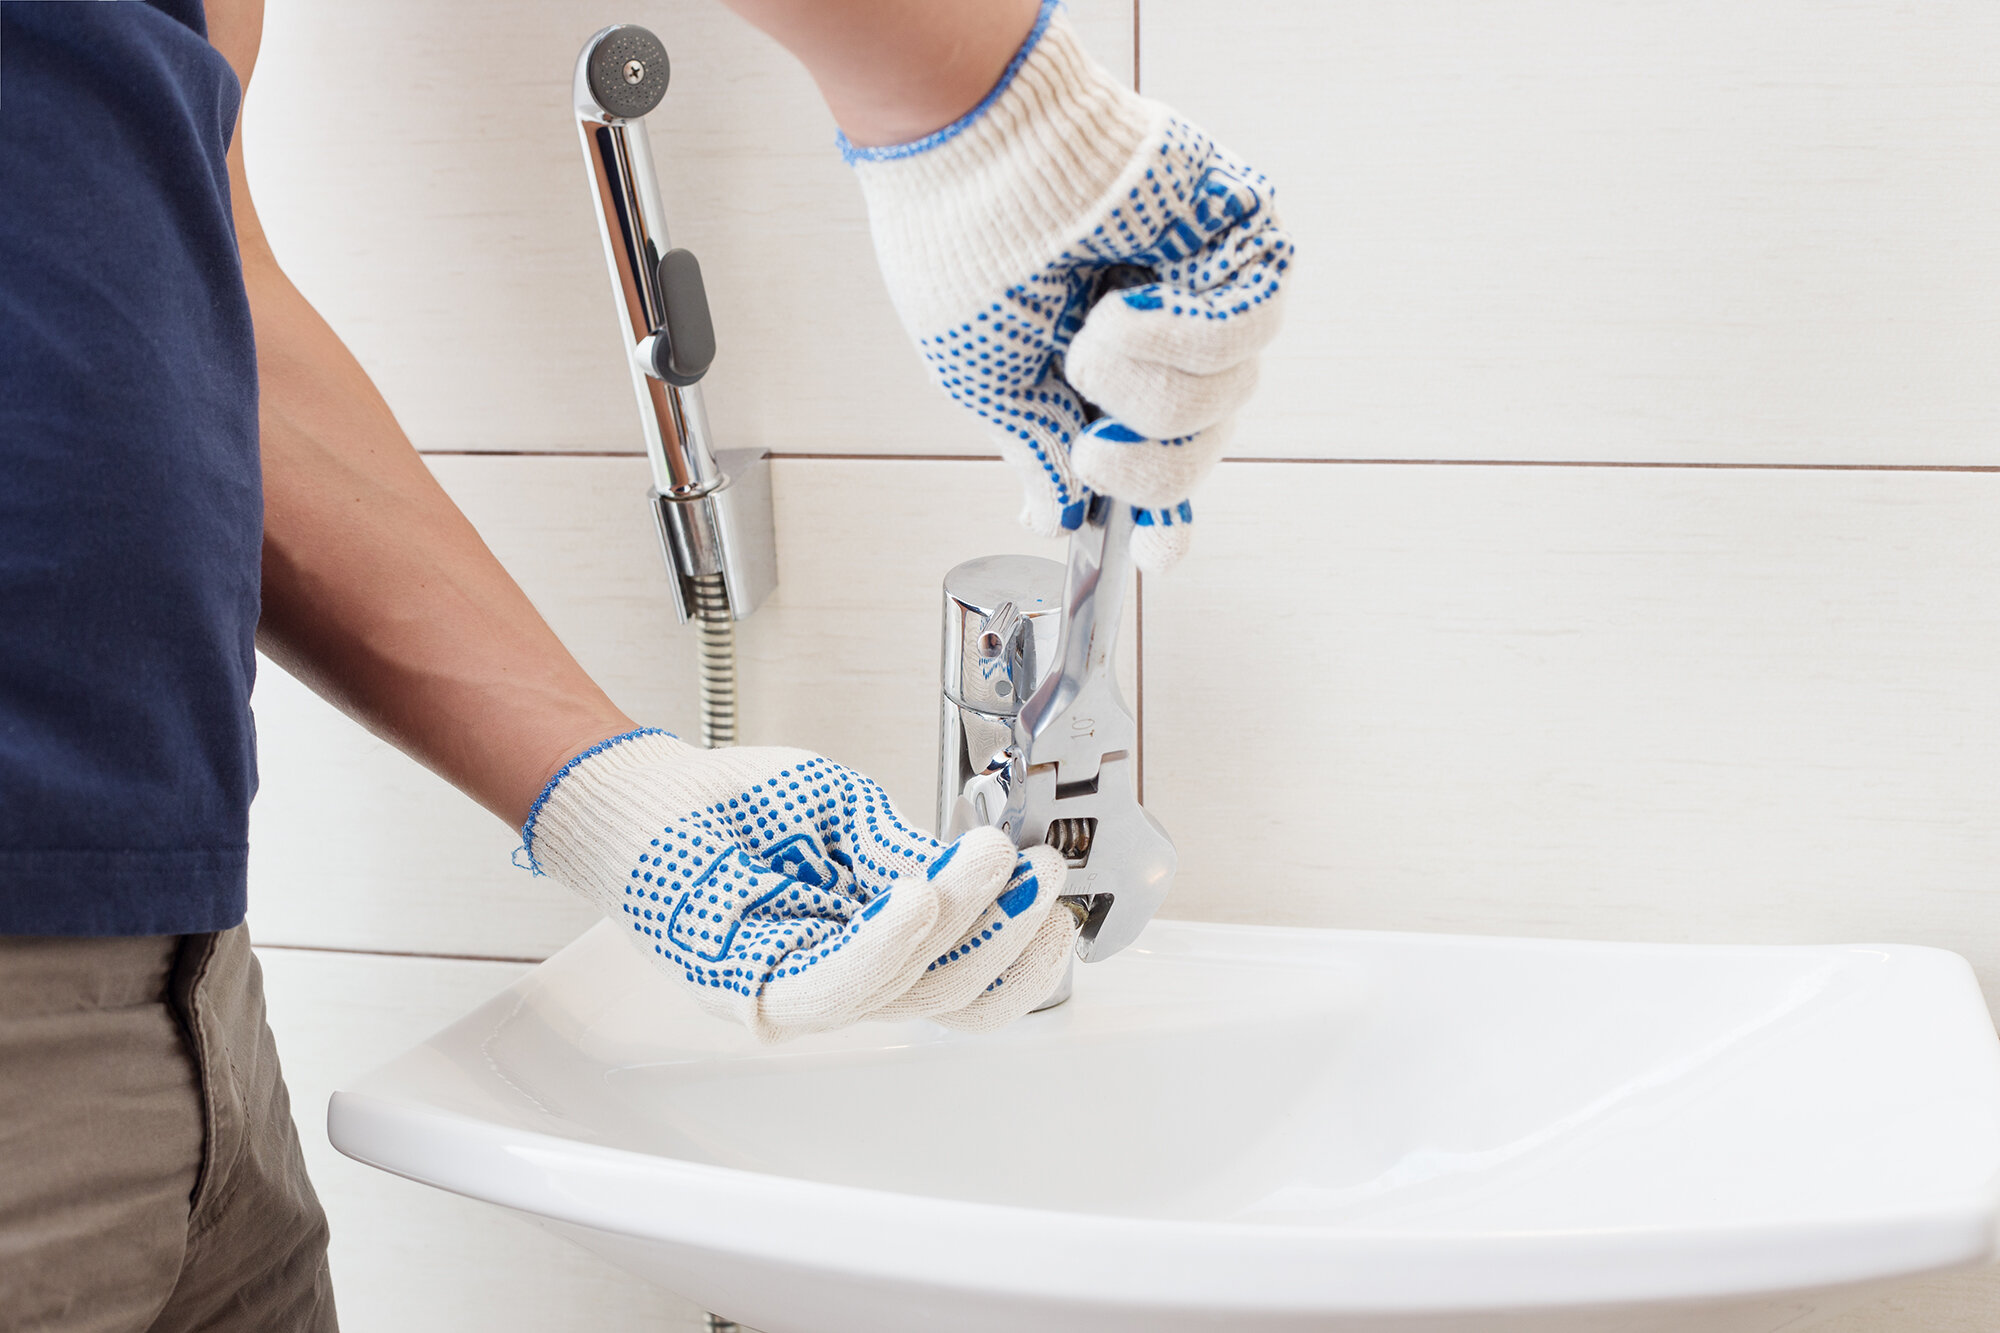 How To Clean A Blocked Shower Drain? - Bond Cleaning in Sunshine Coast